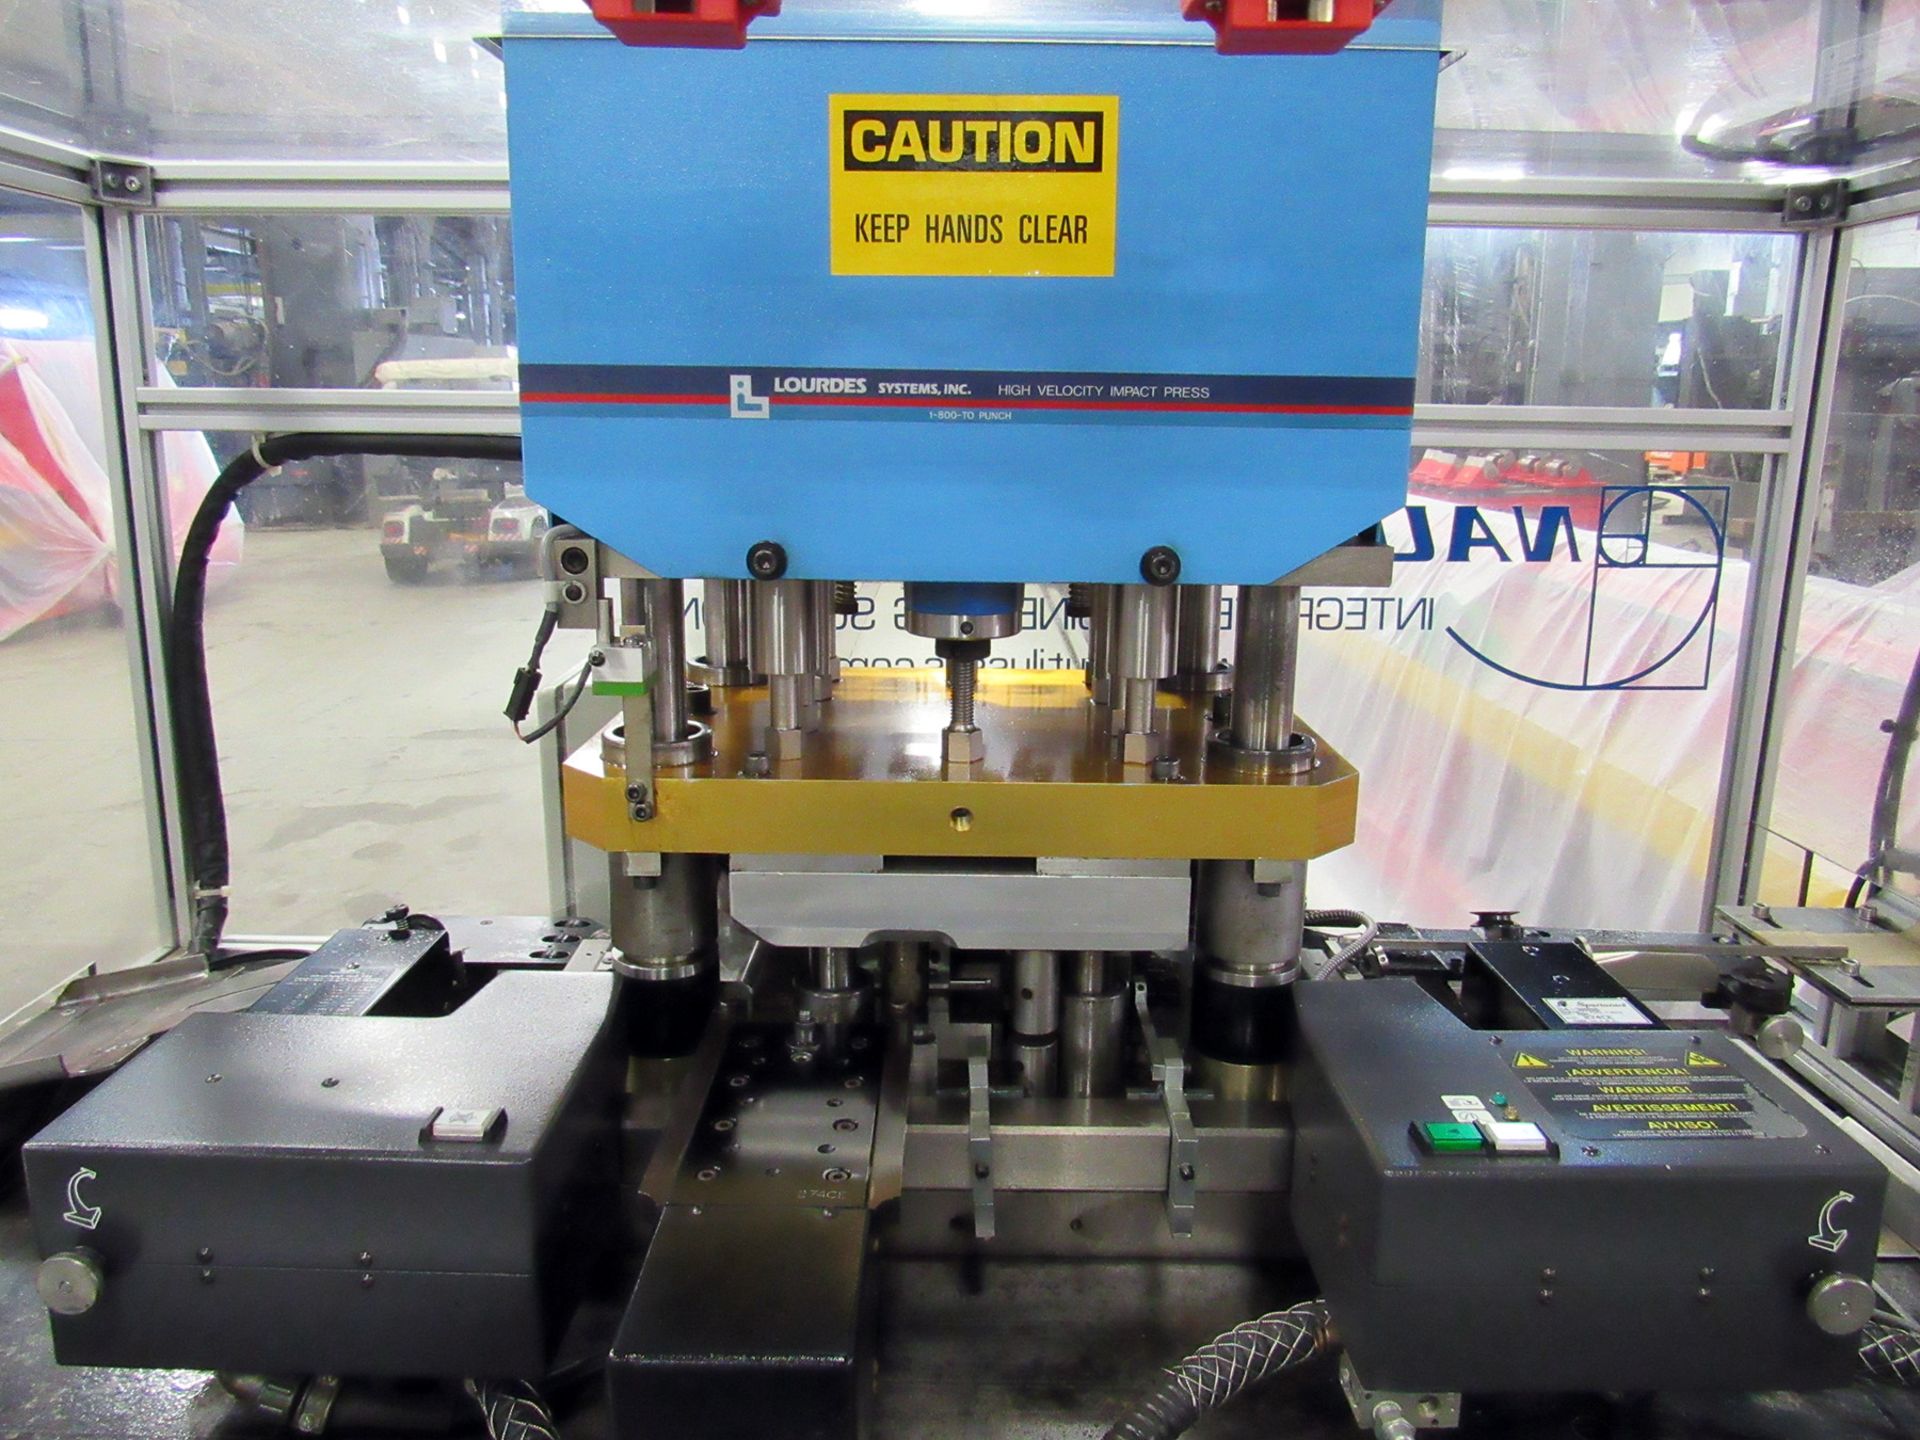 Nautilus Systems Leap LIM Film Diecutting System - Image 5 of 13